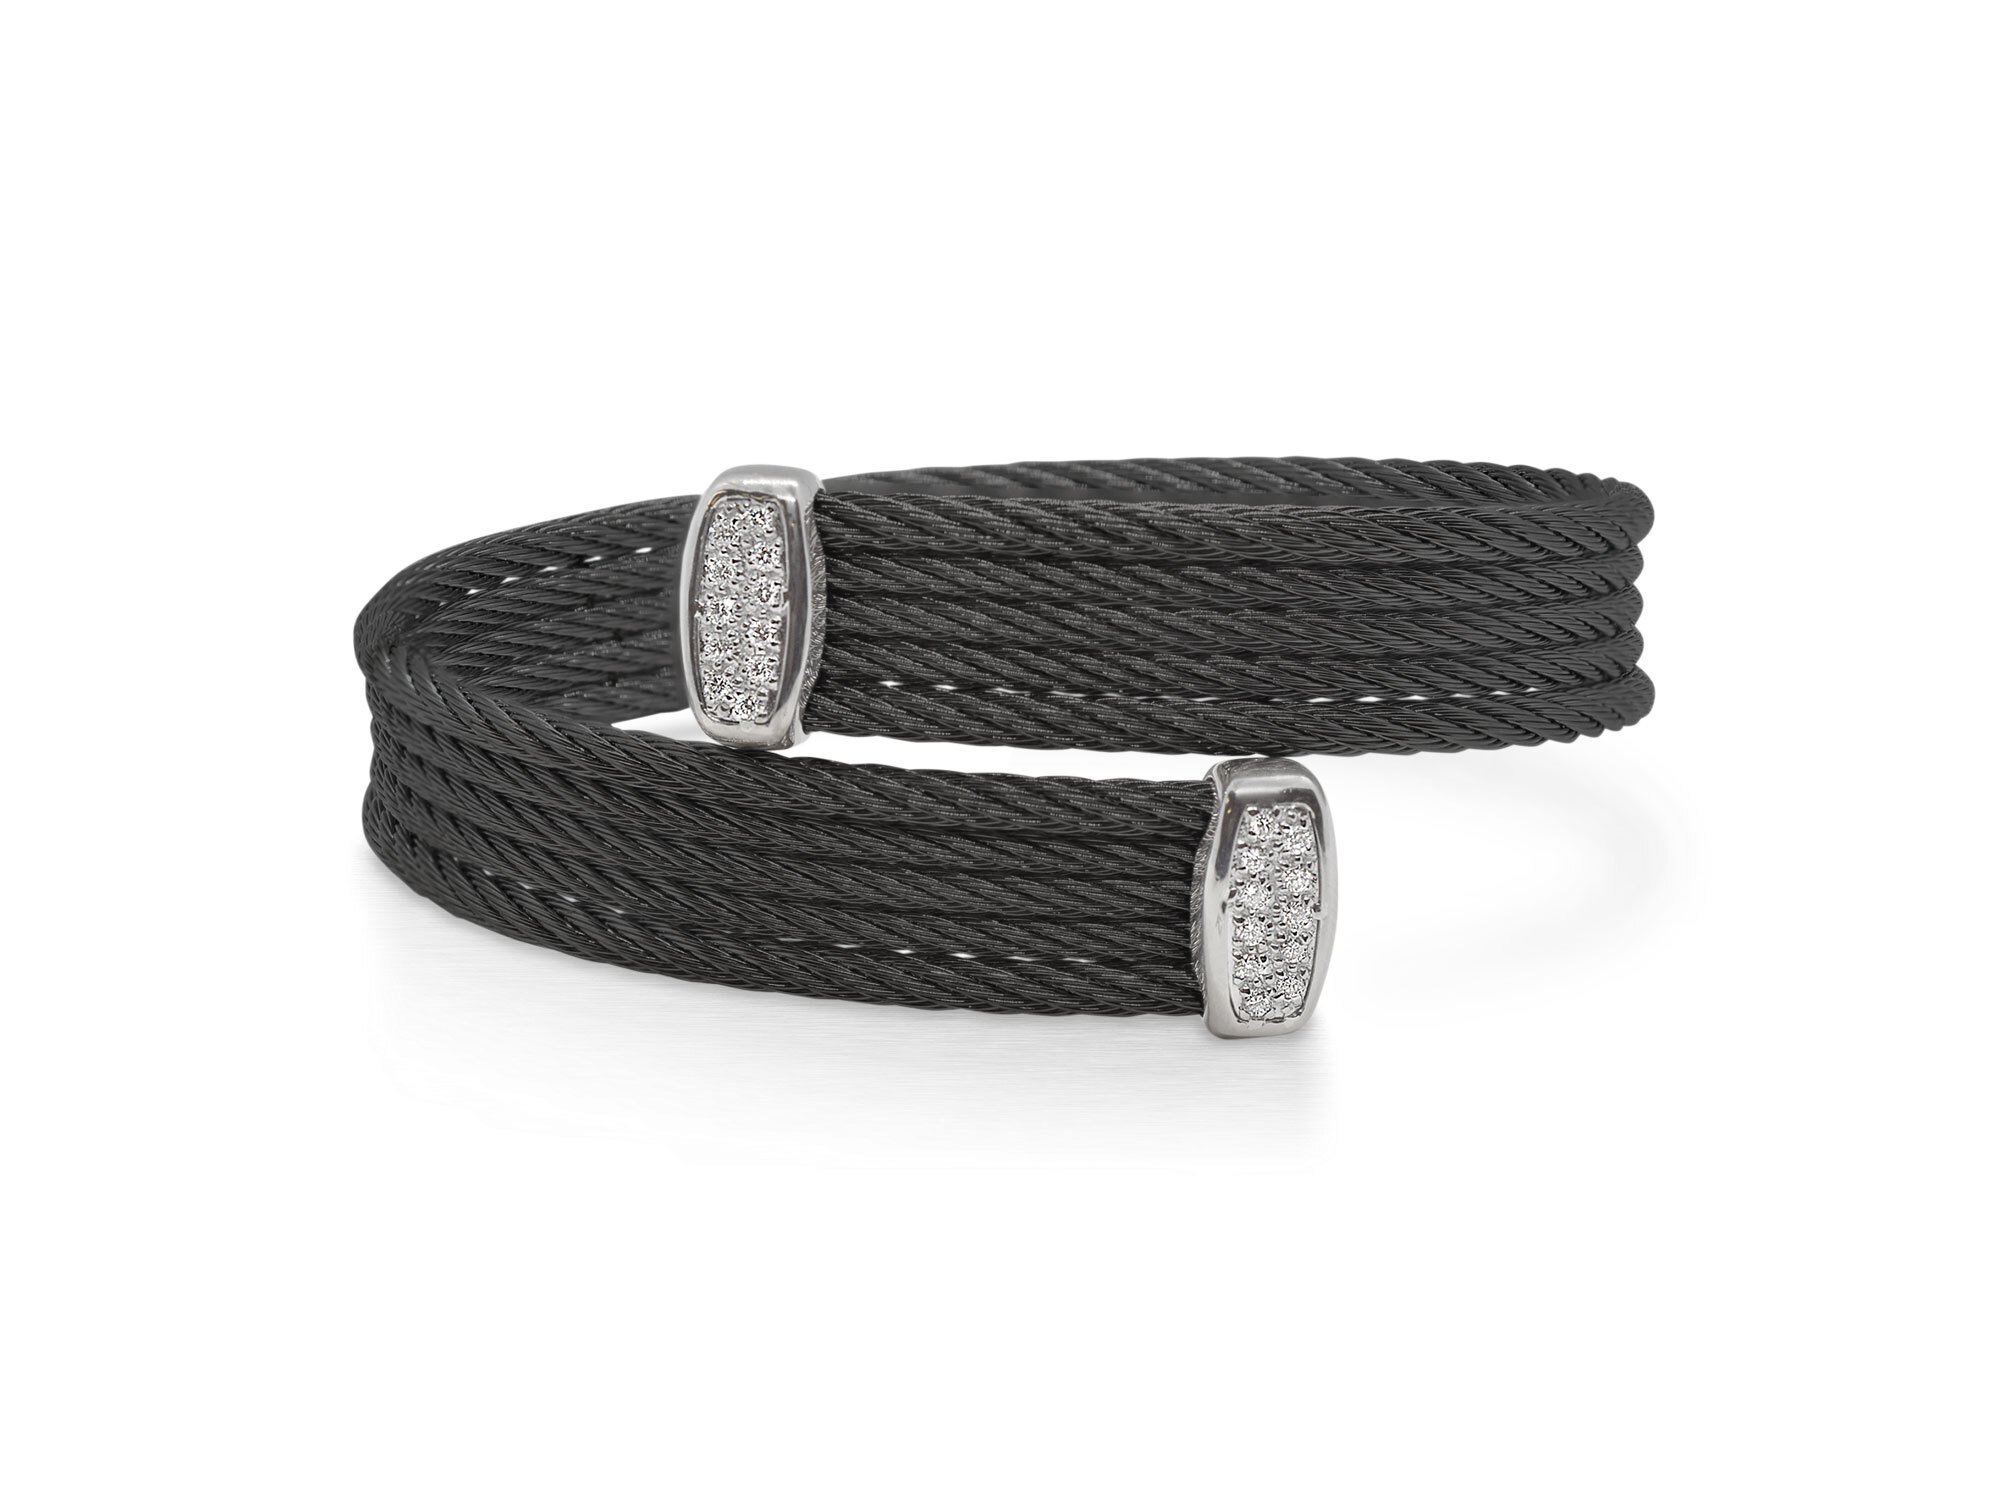 Black Cable Bypass Bracelet with 18tk White Gold & Diamonds